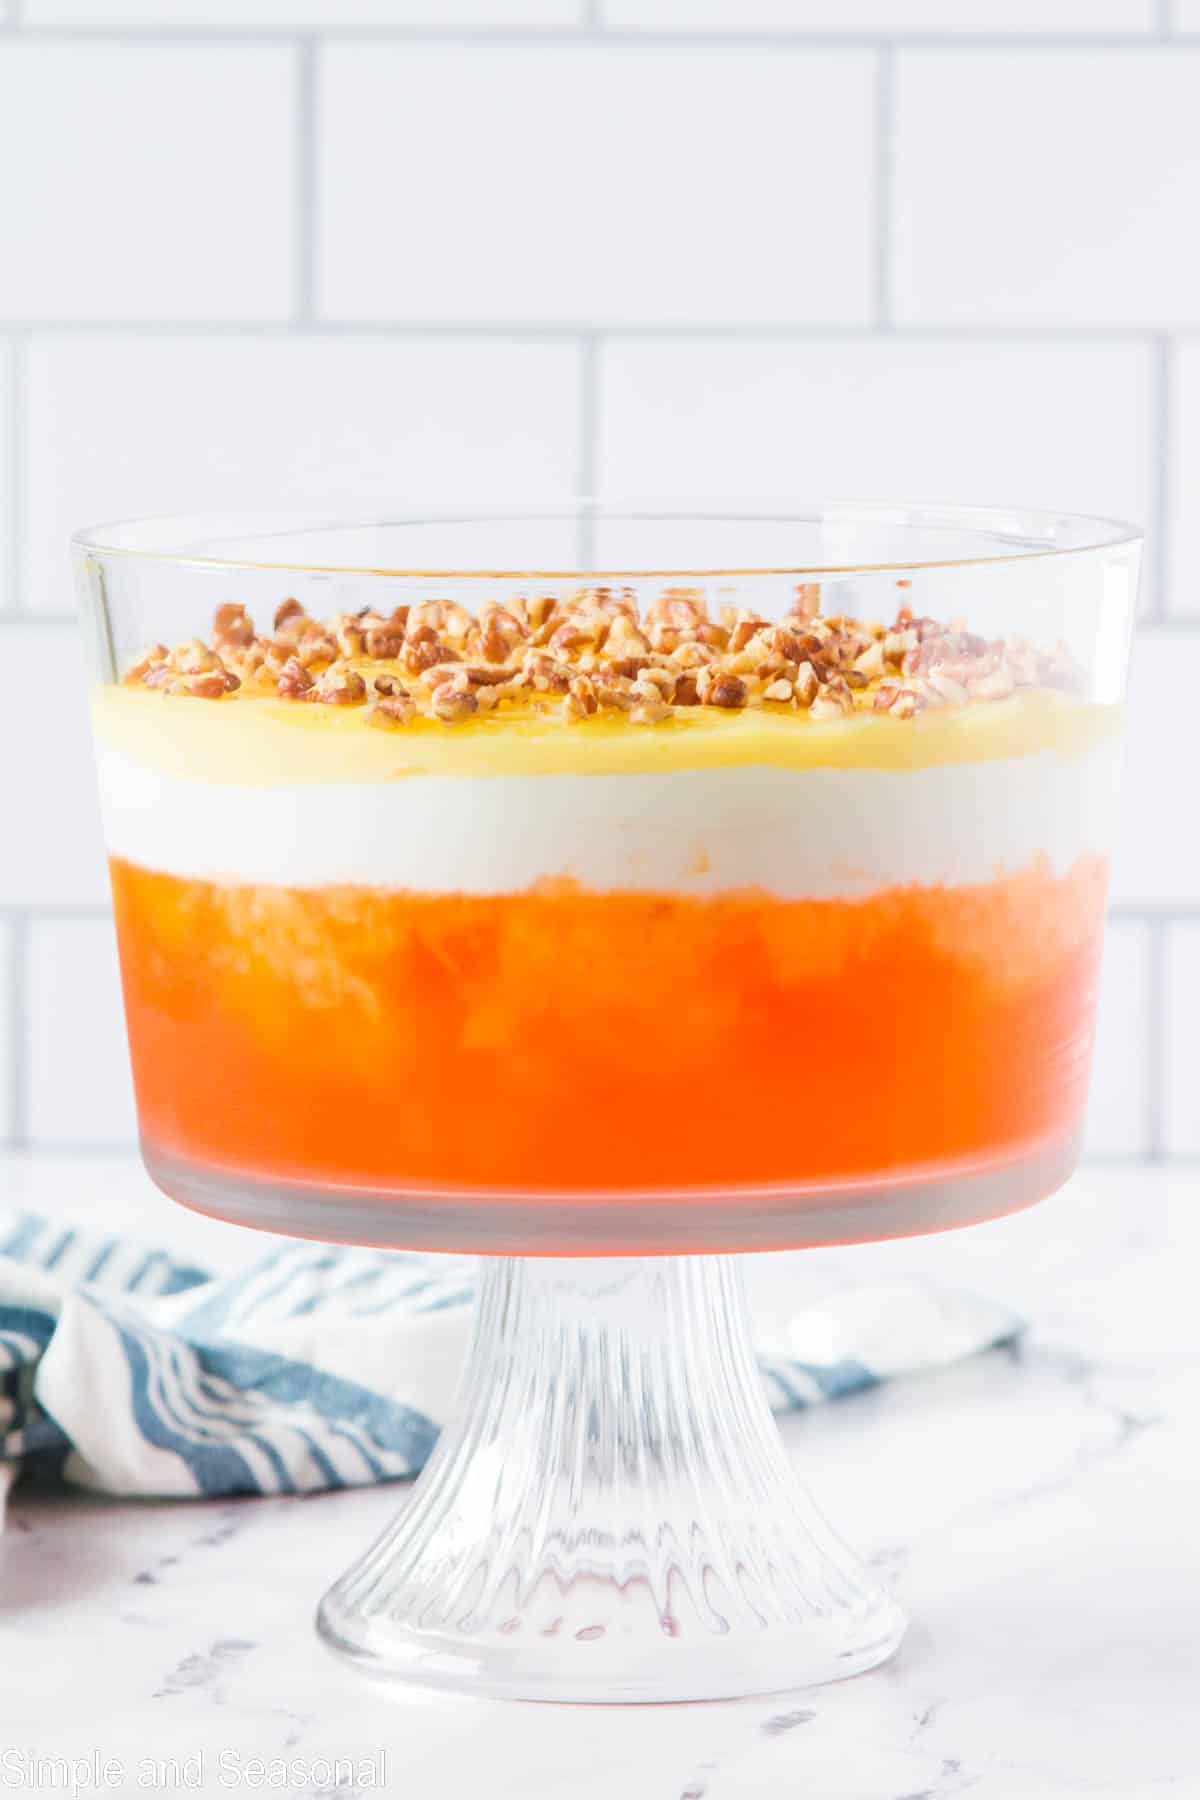 completed orange jello layered dessert with pecans on top